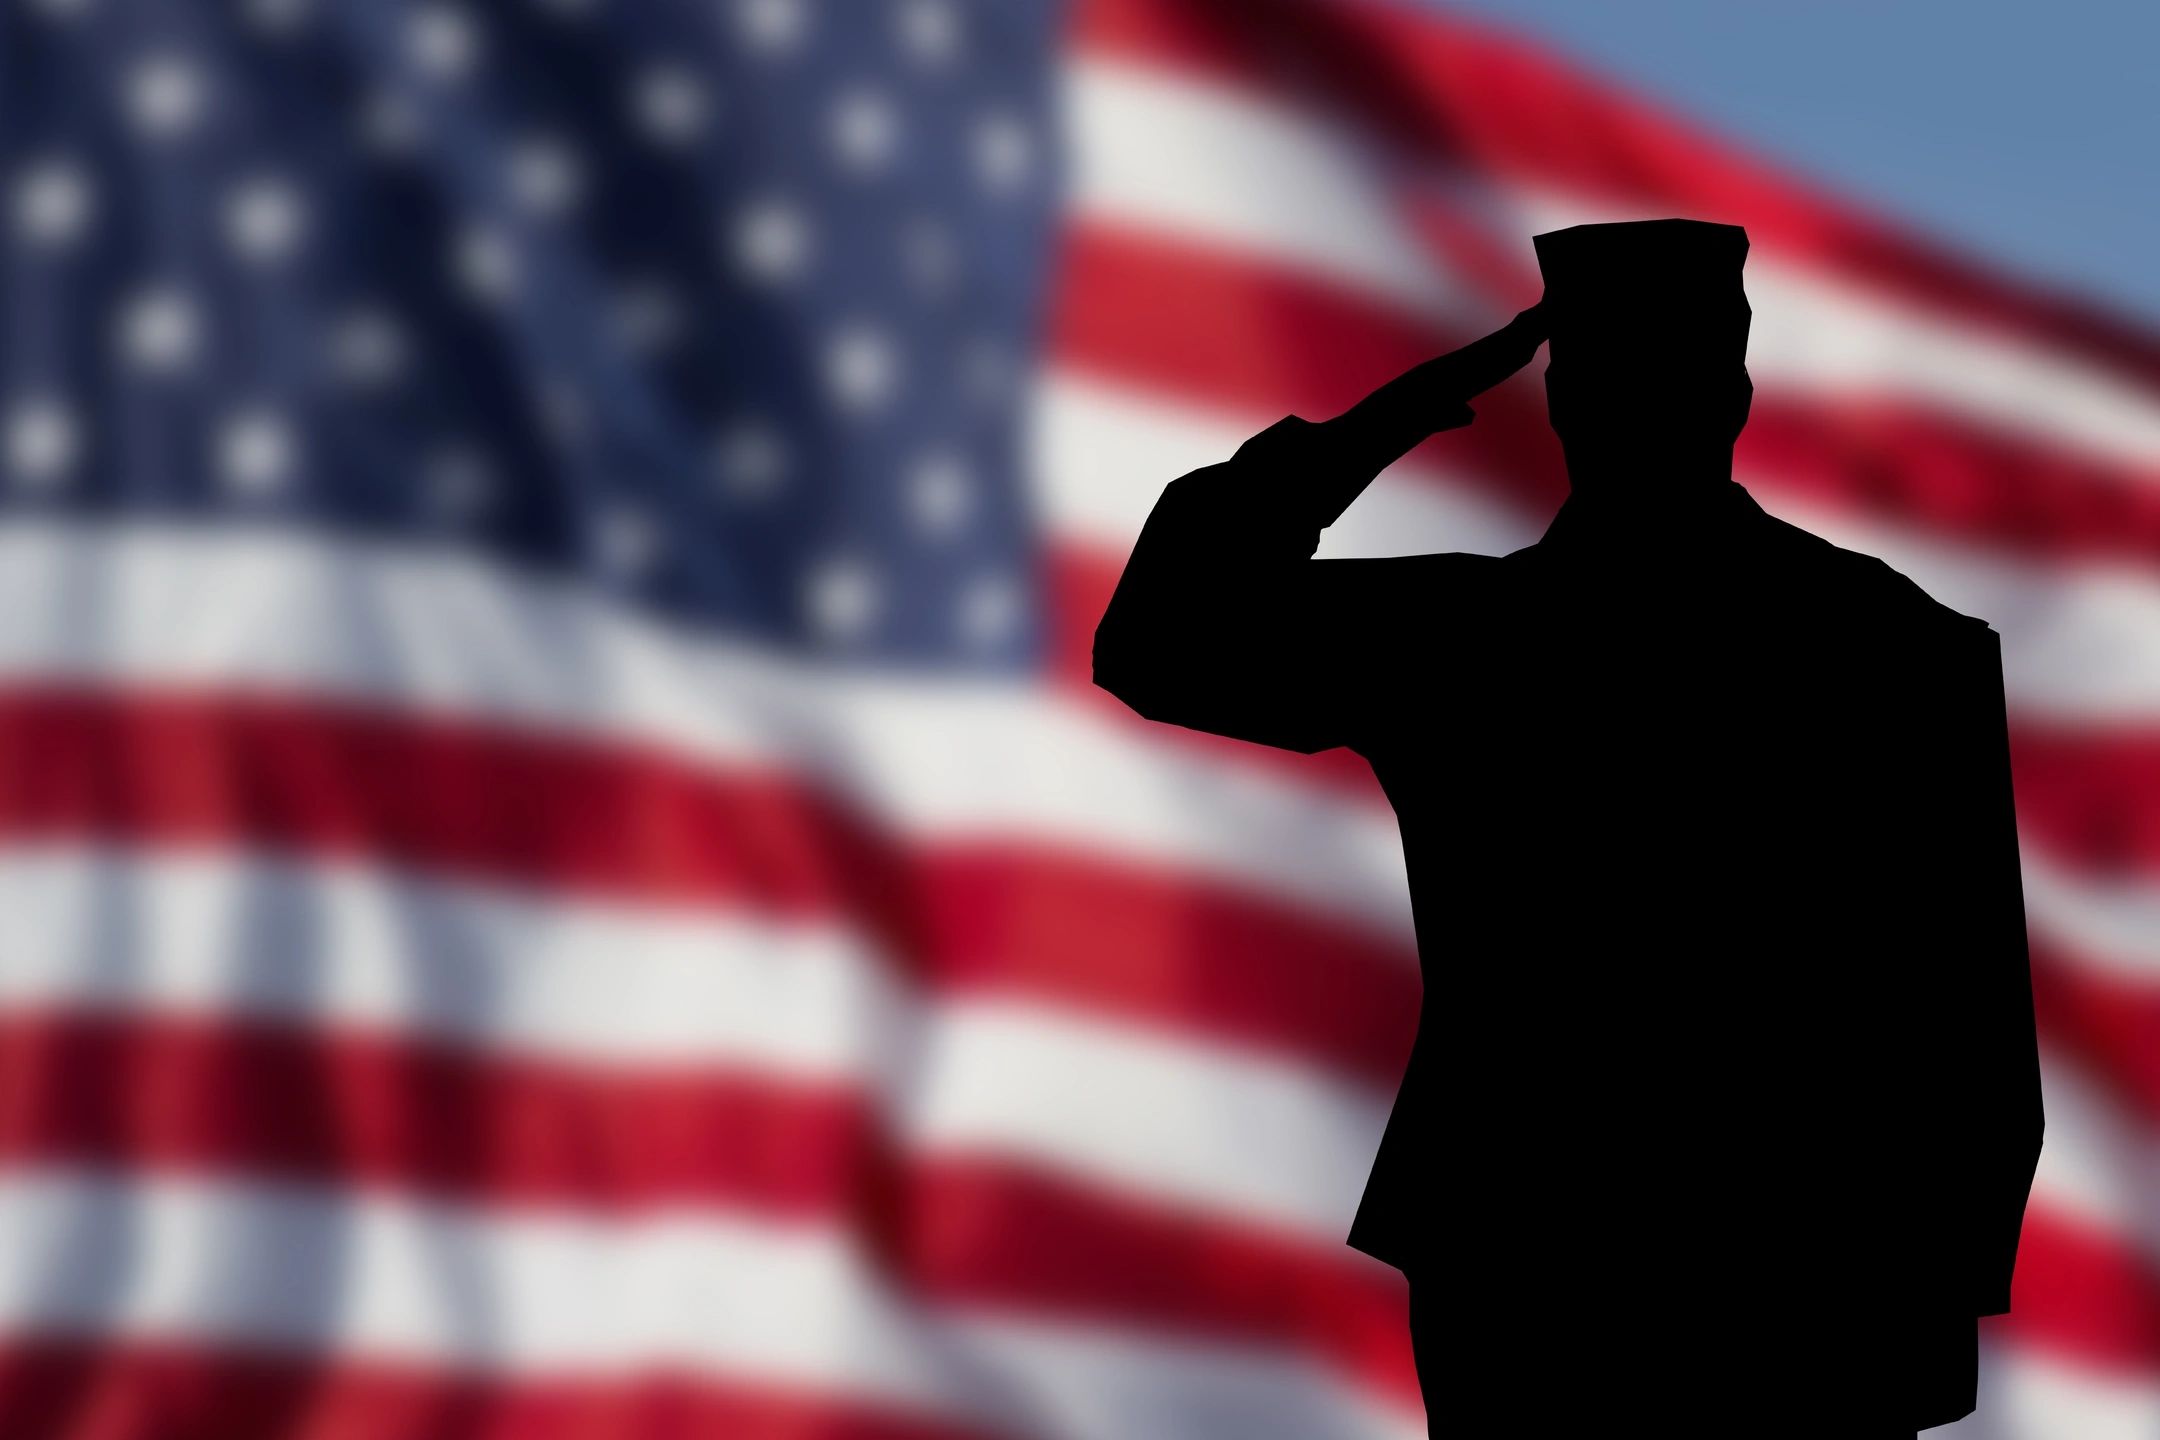 An image of an American flag with the silhouette of a veteran saluting in front.